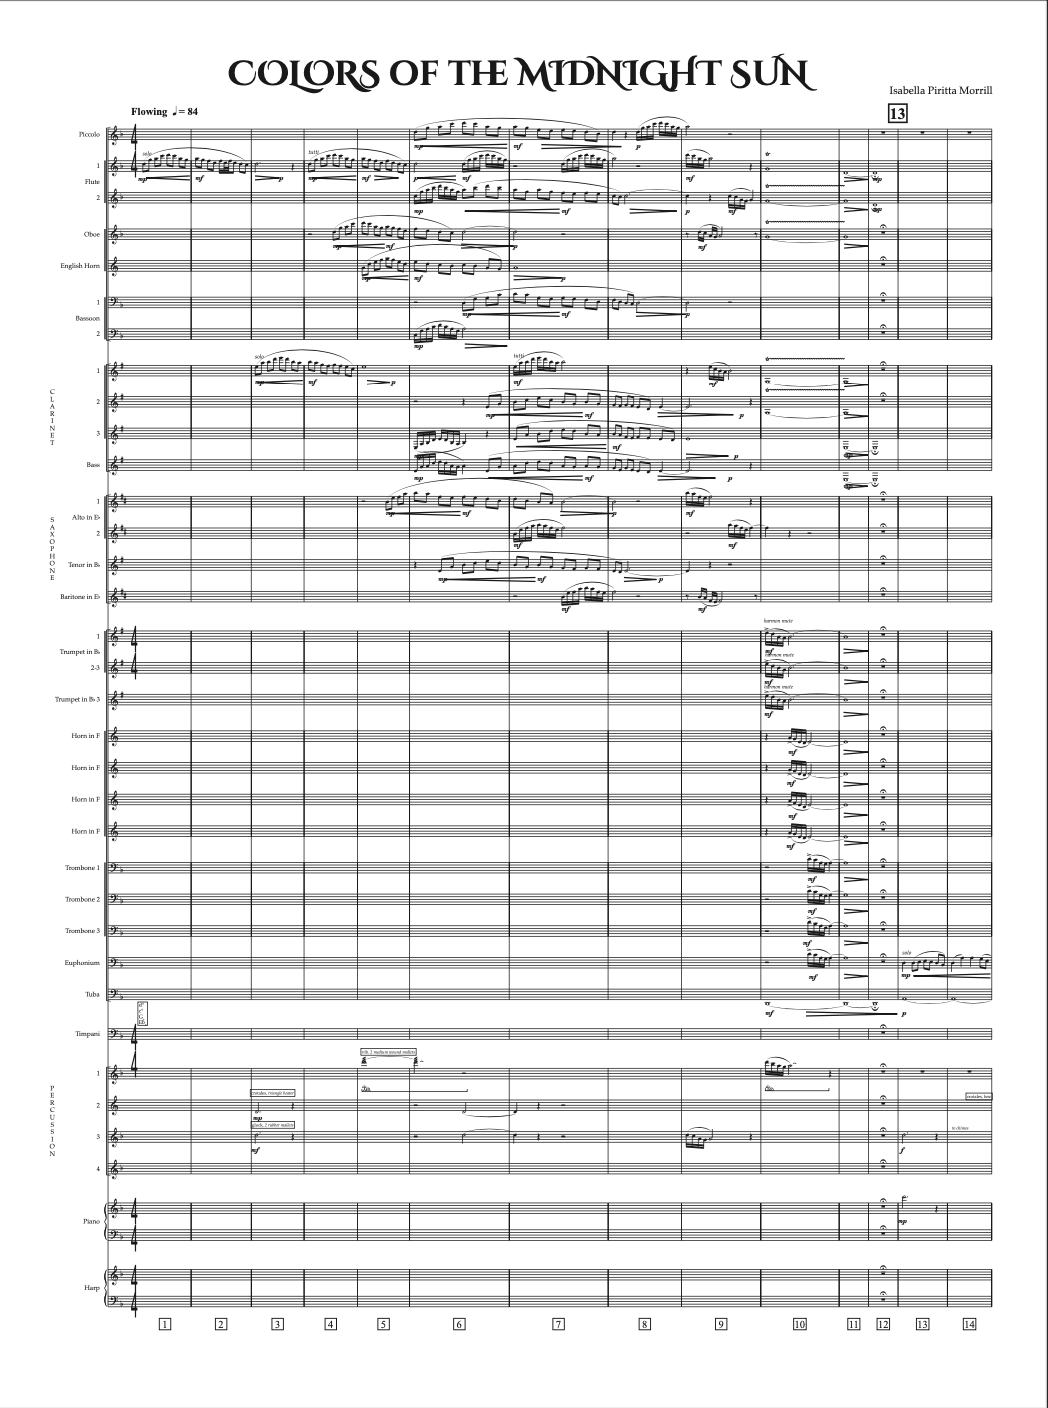 Colors Of The Midnight Sun (Score Only) by Isabella Piritta Morrill